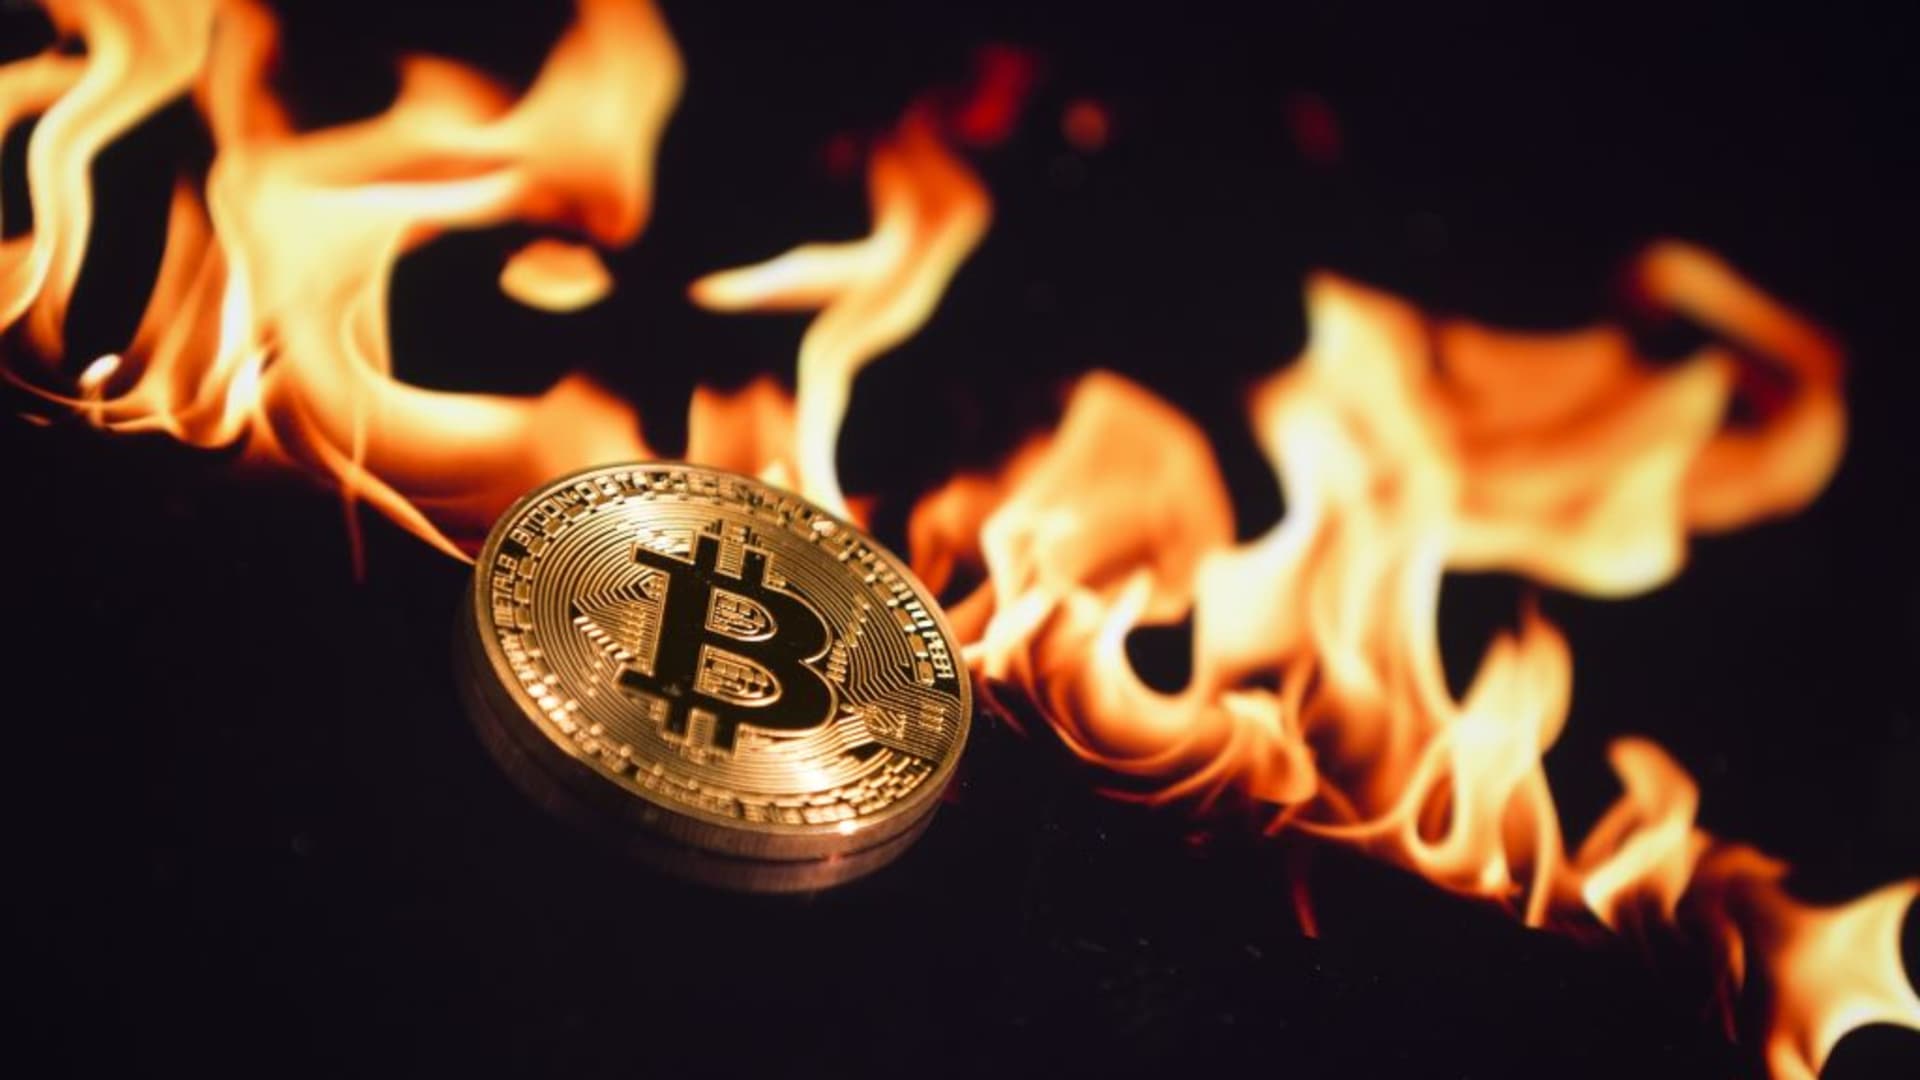 Five reasons bitcoin had its worst quarter in more than a decade